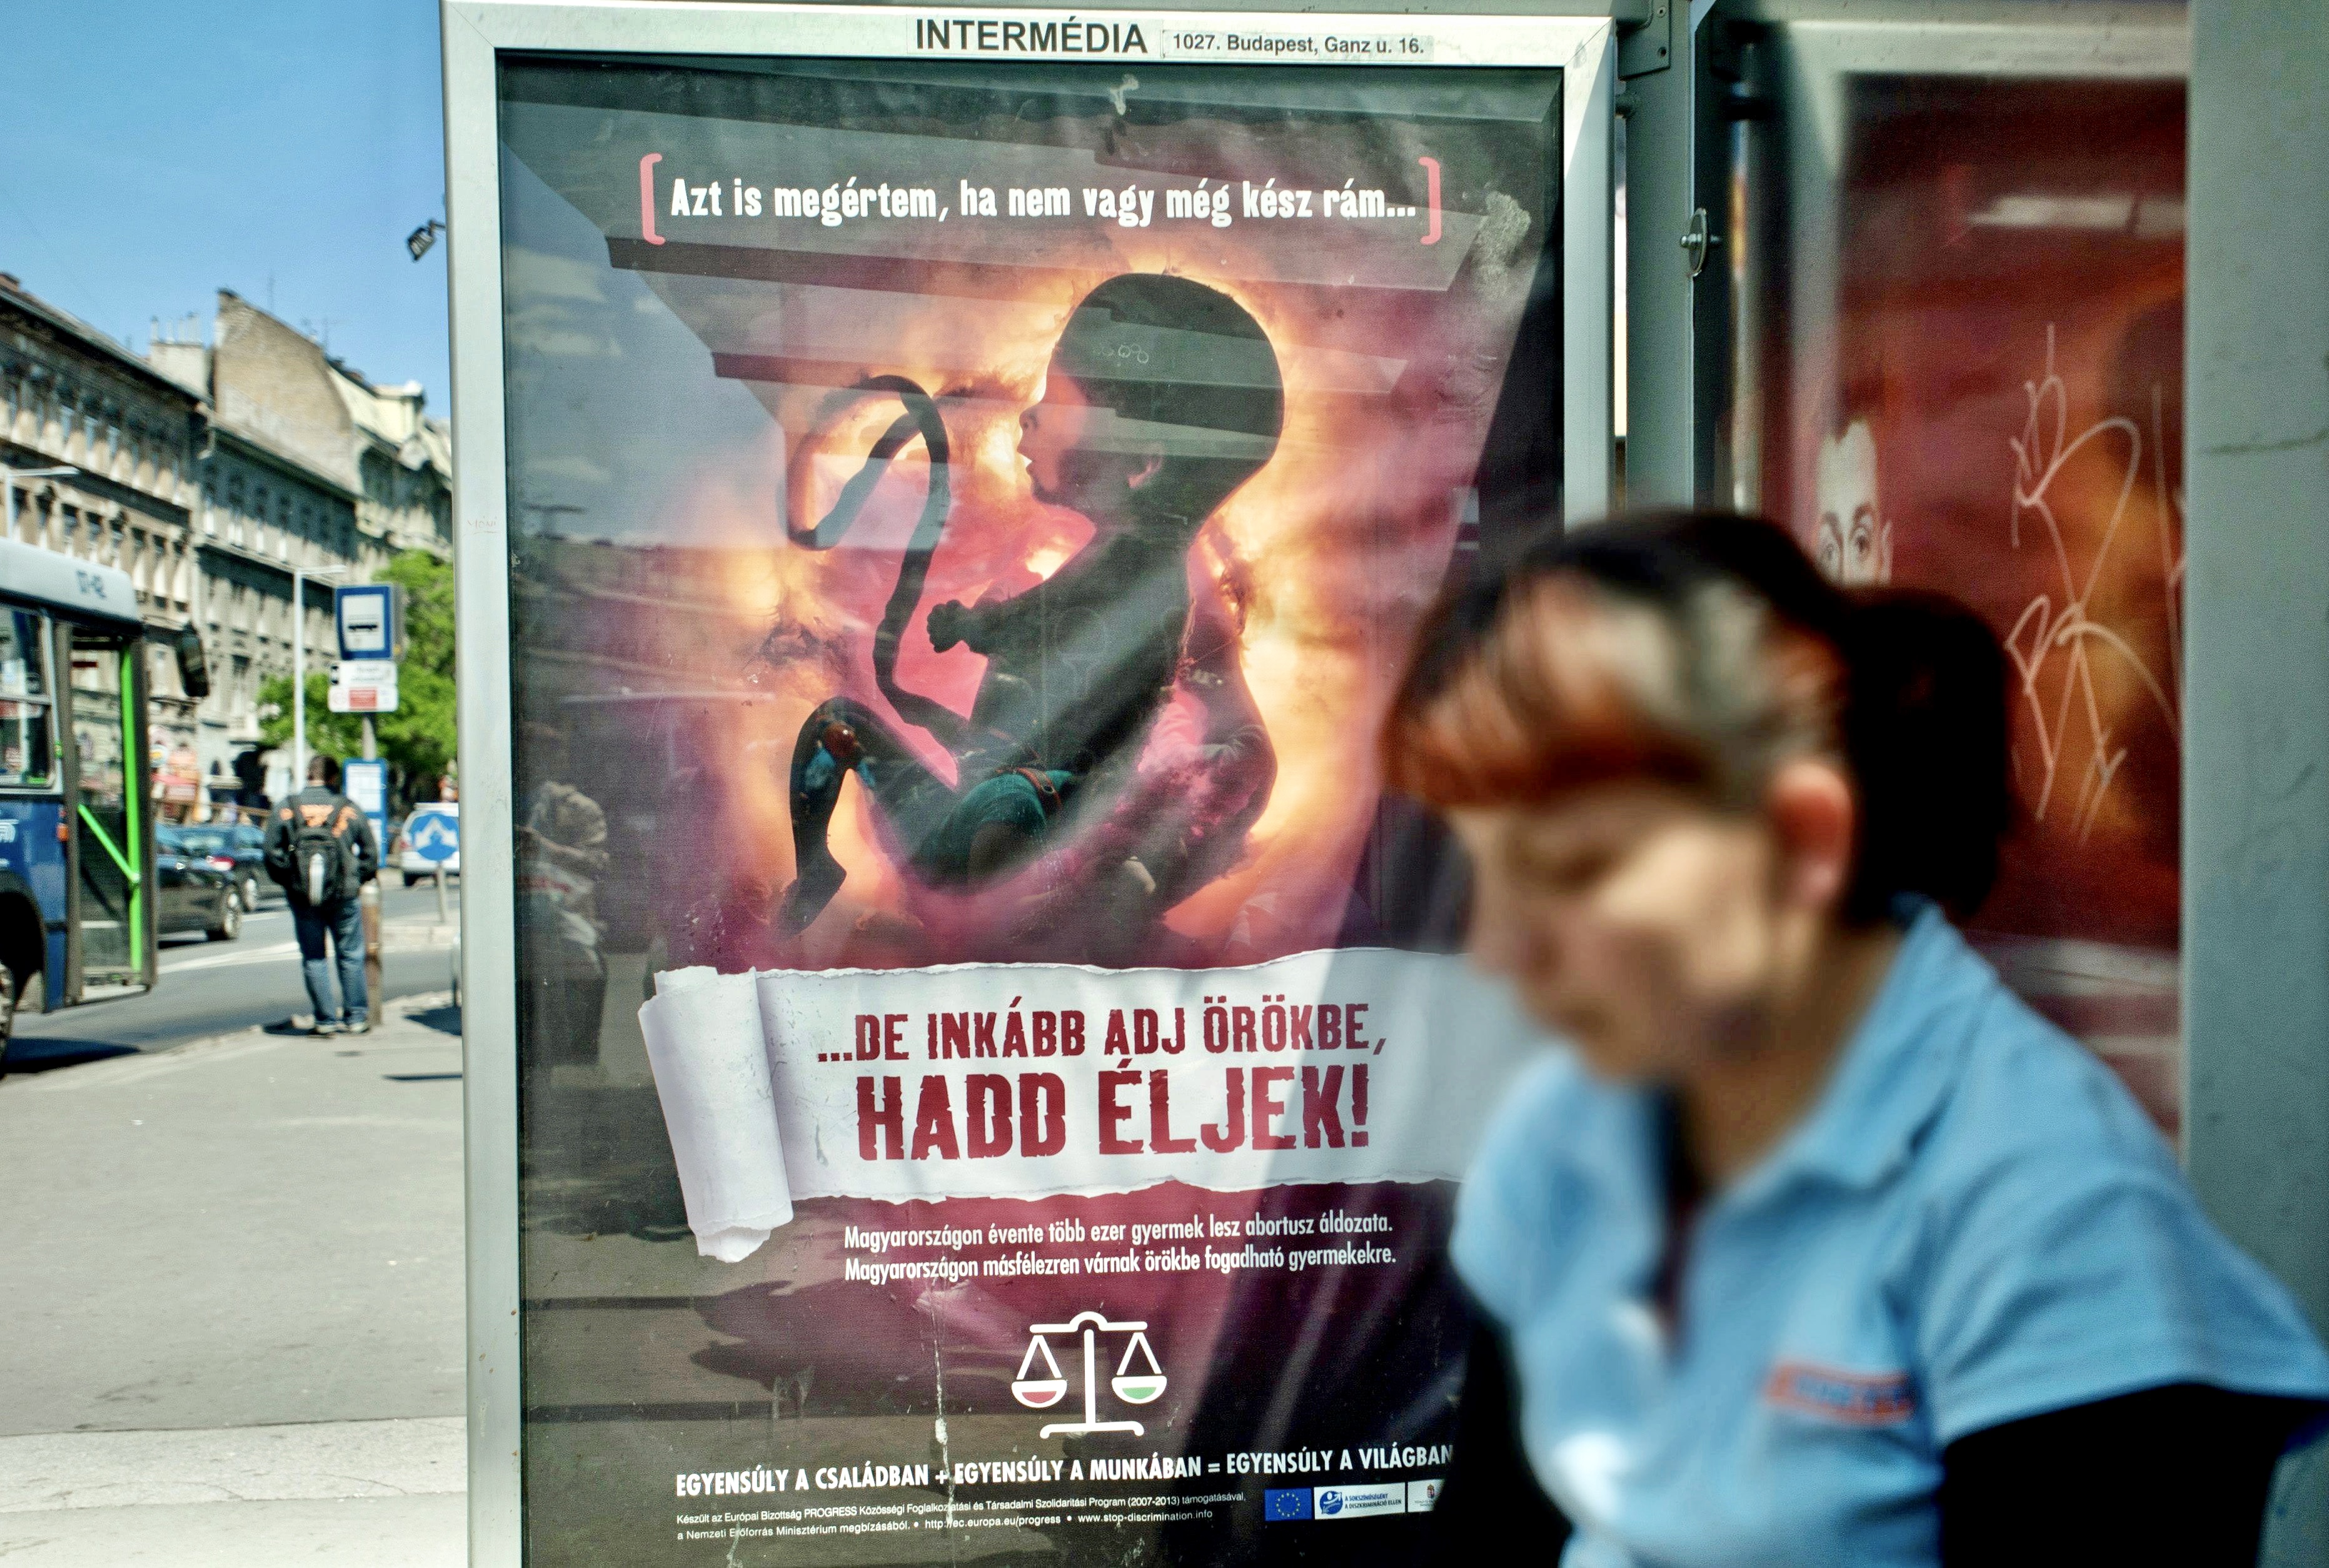 Hungary Will Now Force Women To Listen To The Fetus’ Heartbeat Before They Can Get An Abortion